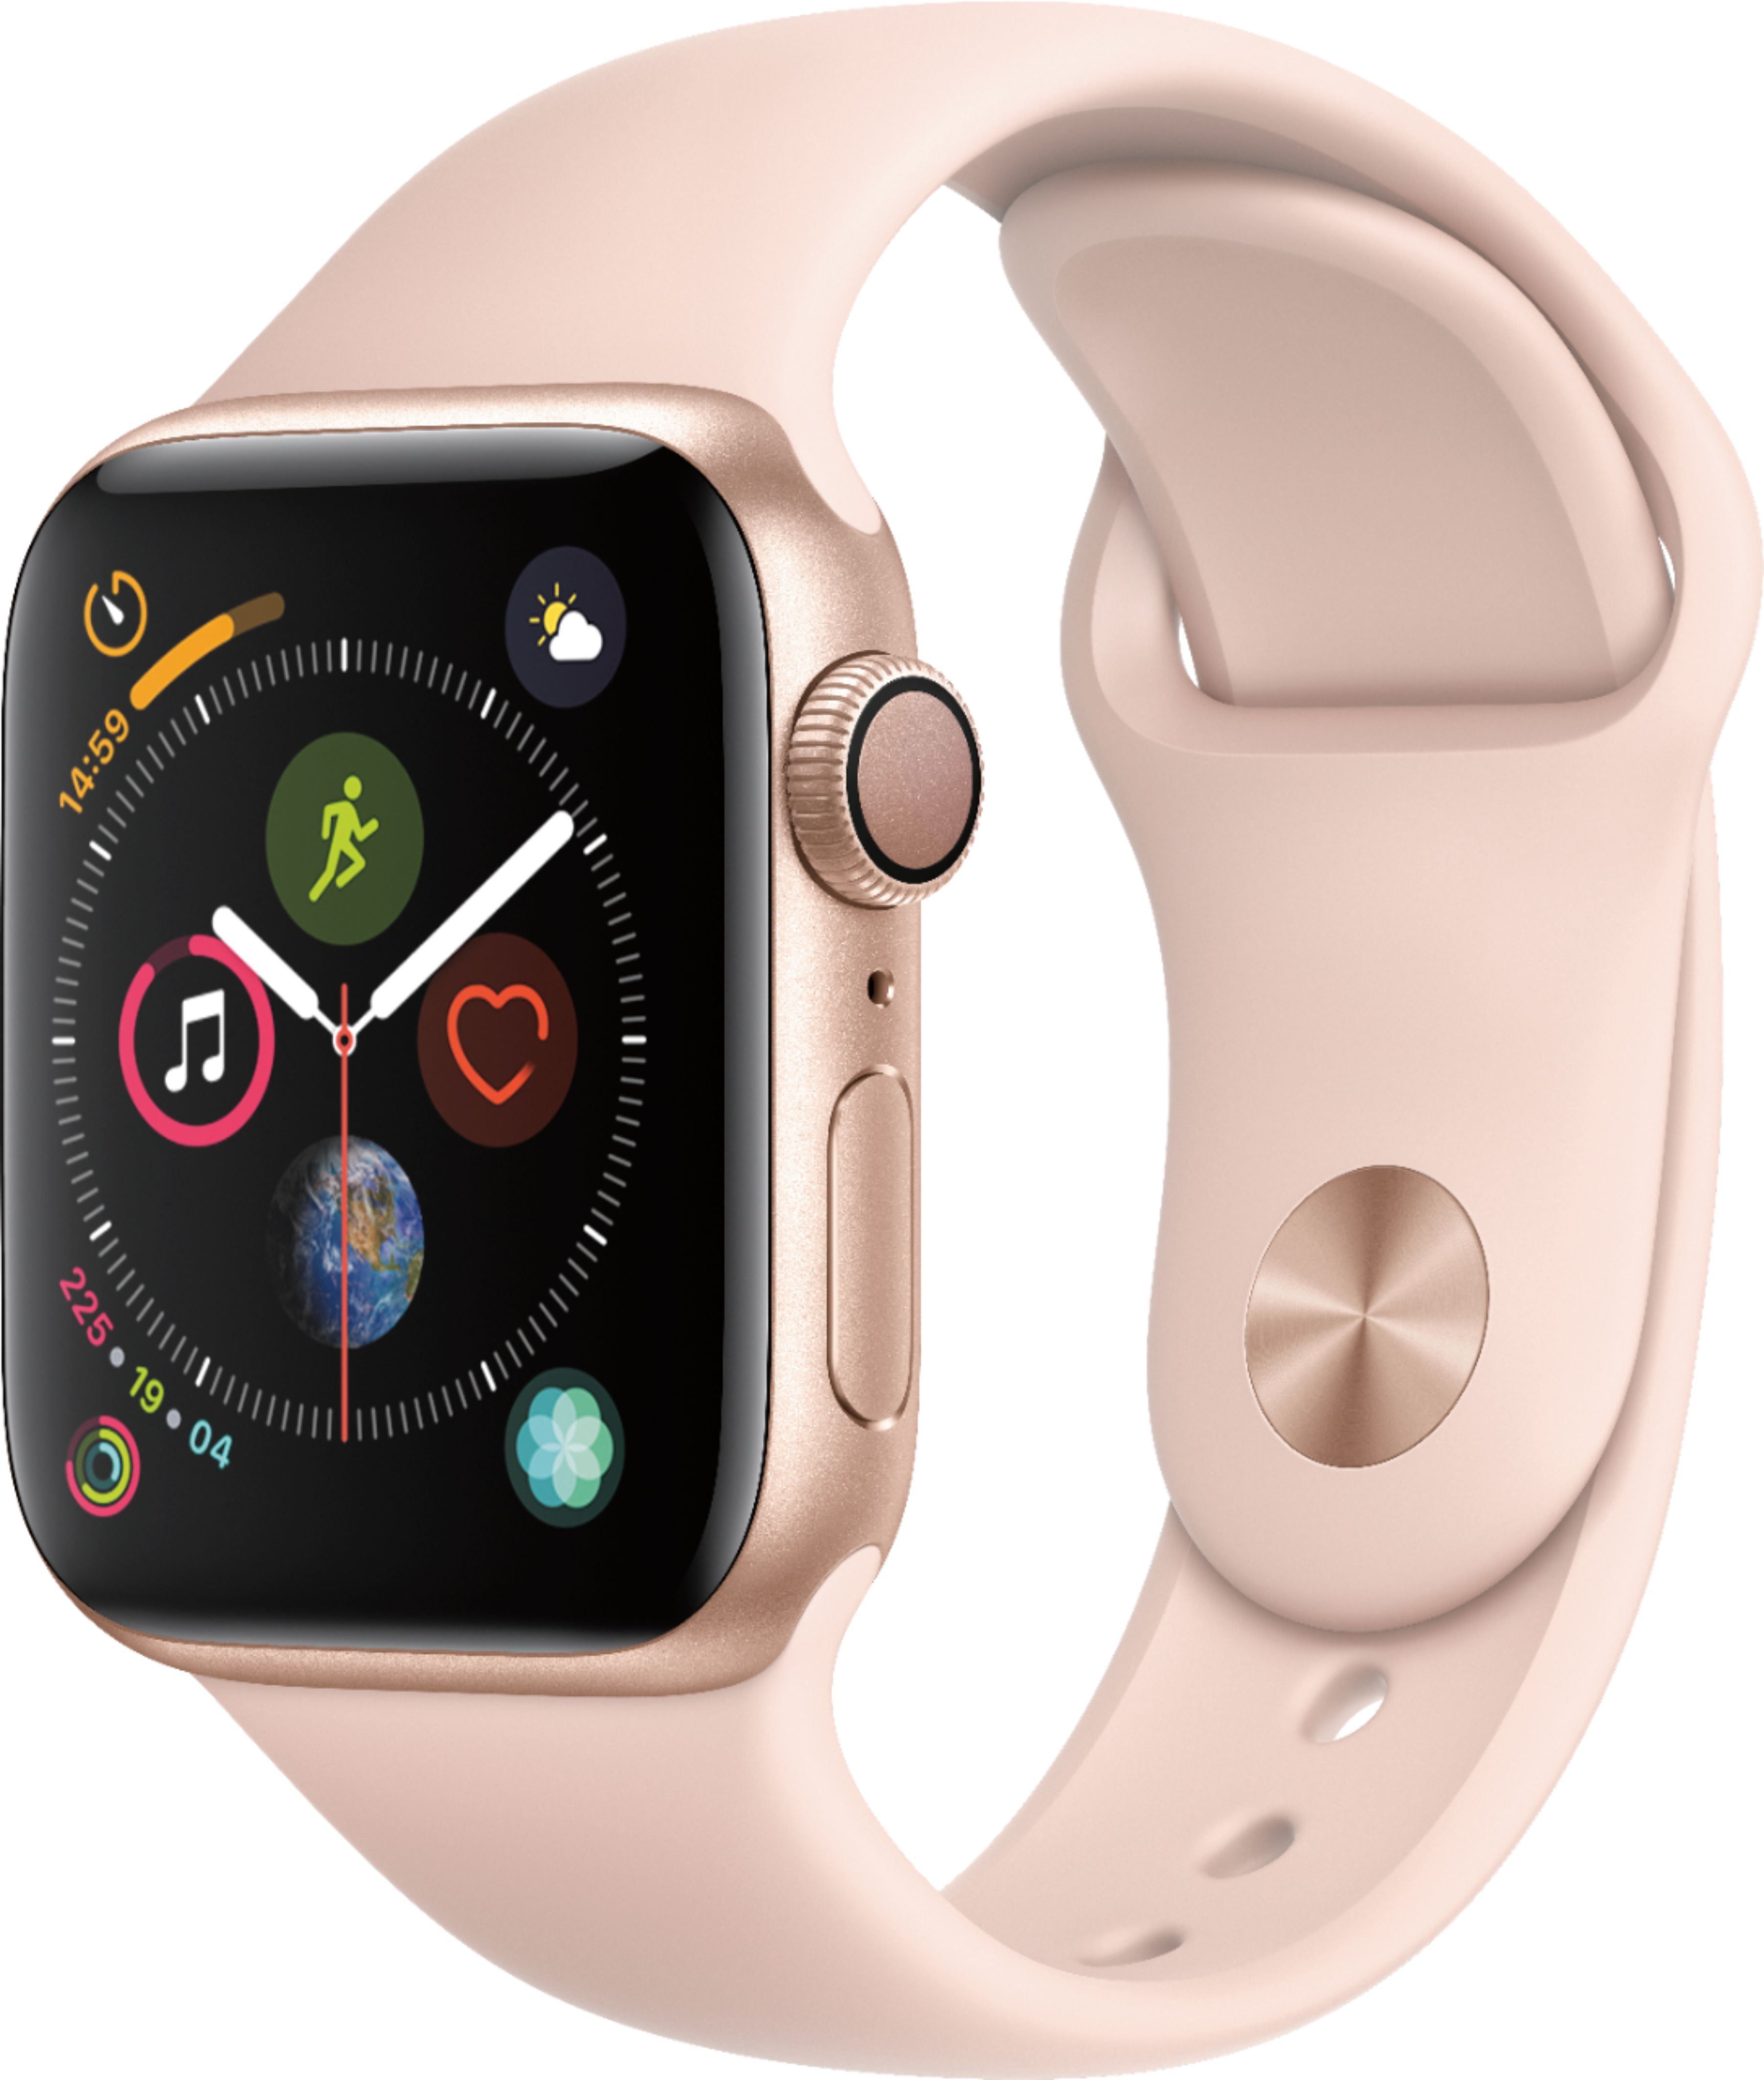 Geek Squad Certified Refurbished Apple Watch Series 4 (GPS) 40mm Gold Aluminum Case with Pink Sand Sport Band - Gold Aluminum